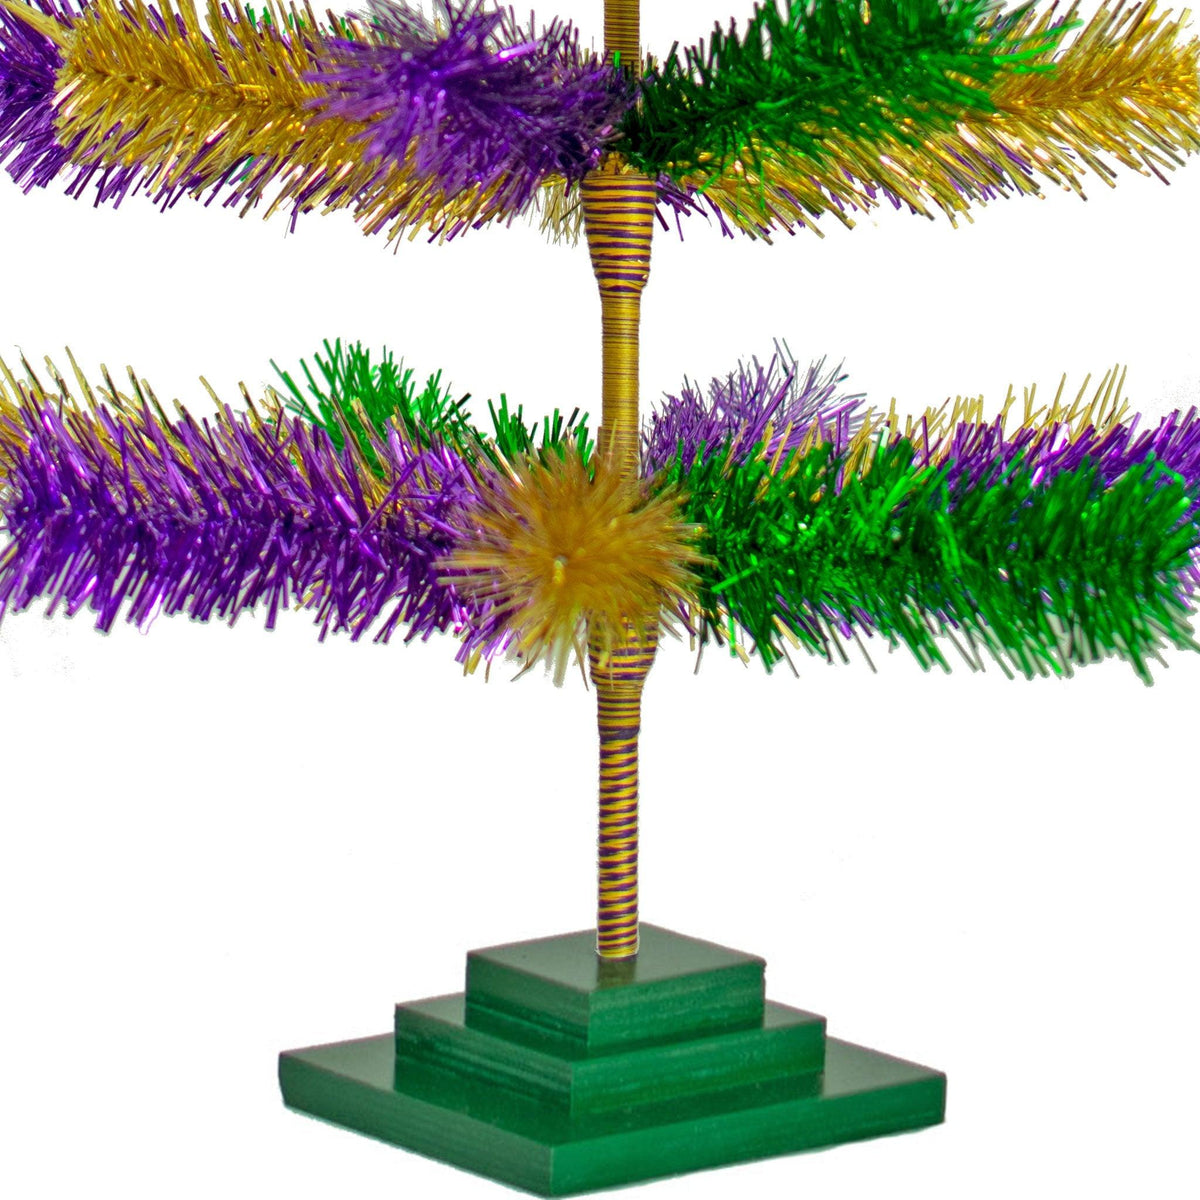 Introducing Lee Display's brand new Purple, Green, & Gold Christmas Trees made by hand in the USA!    Decorate your holidays with a classic Mardi Gras-themed Tinsel Christmas Tree on sale at leedisplay.com